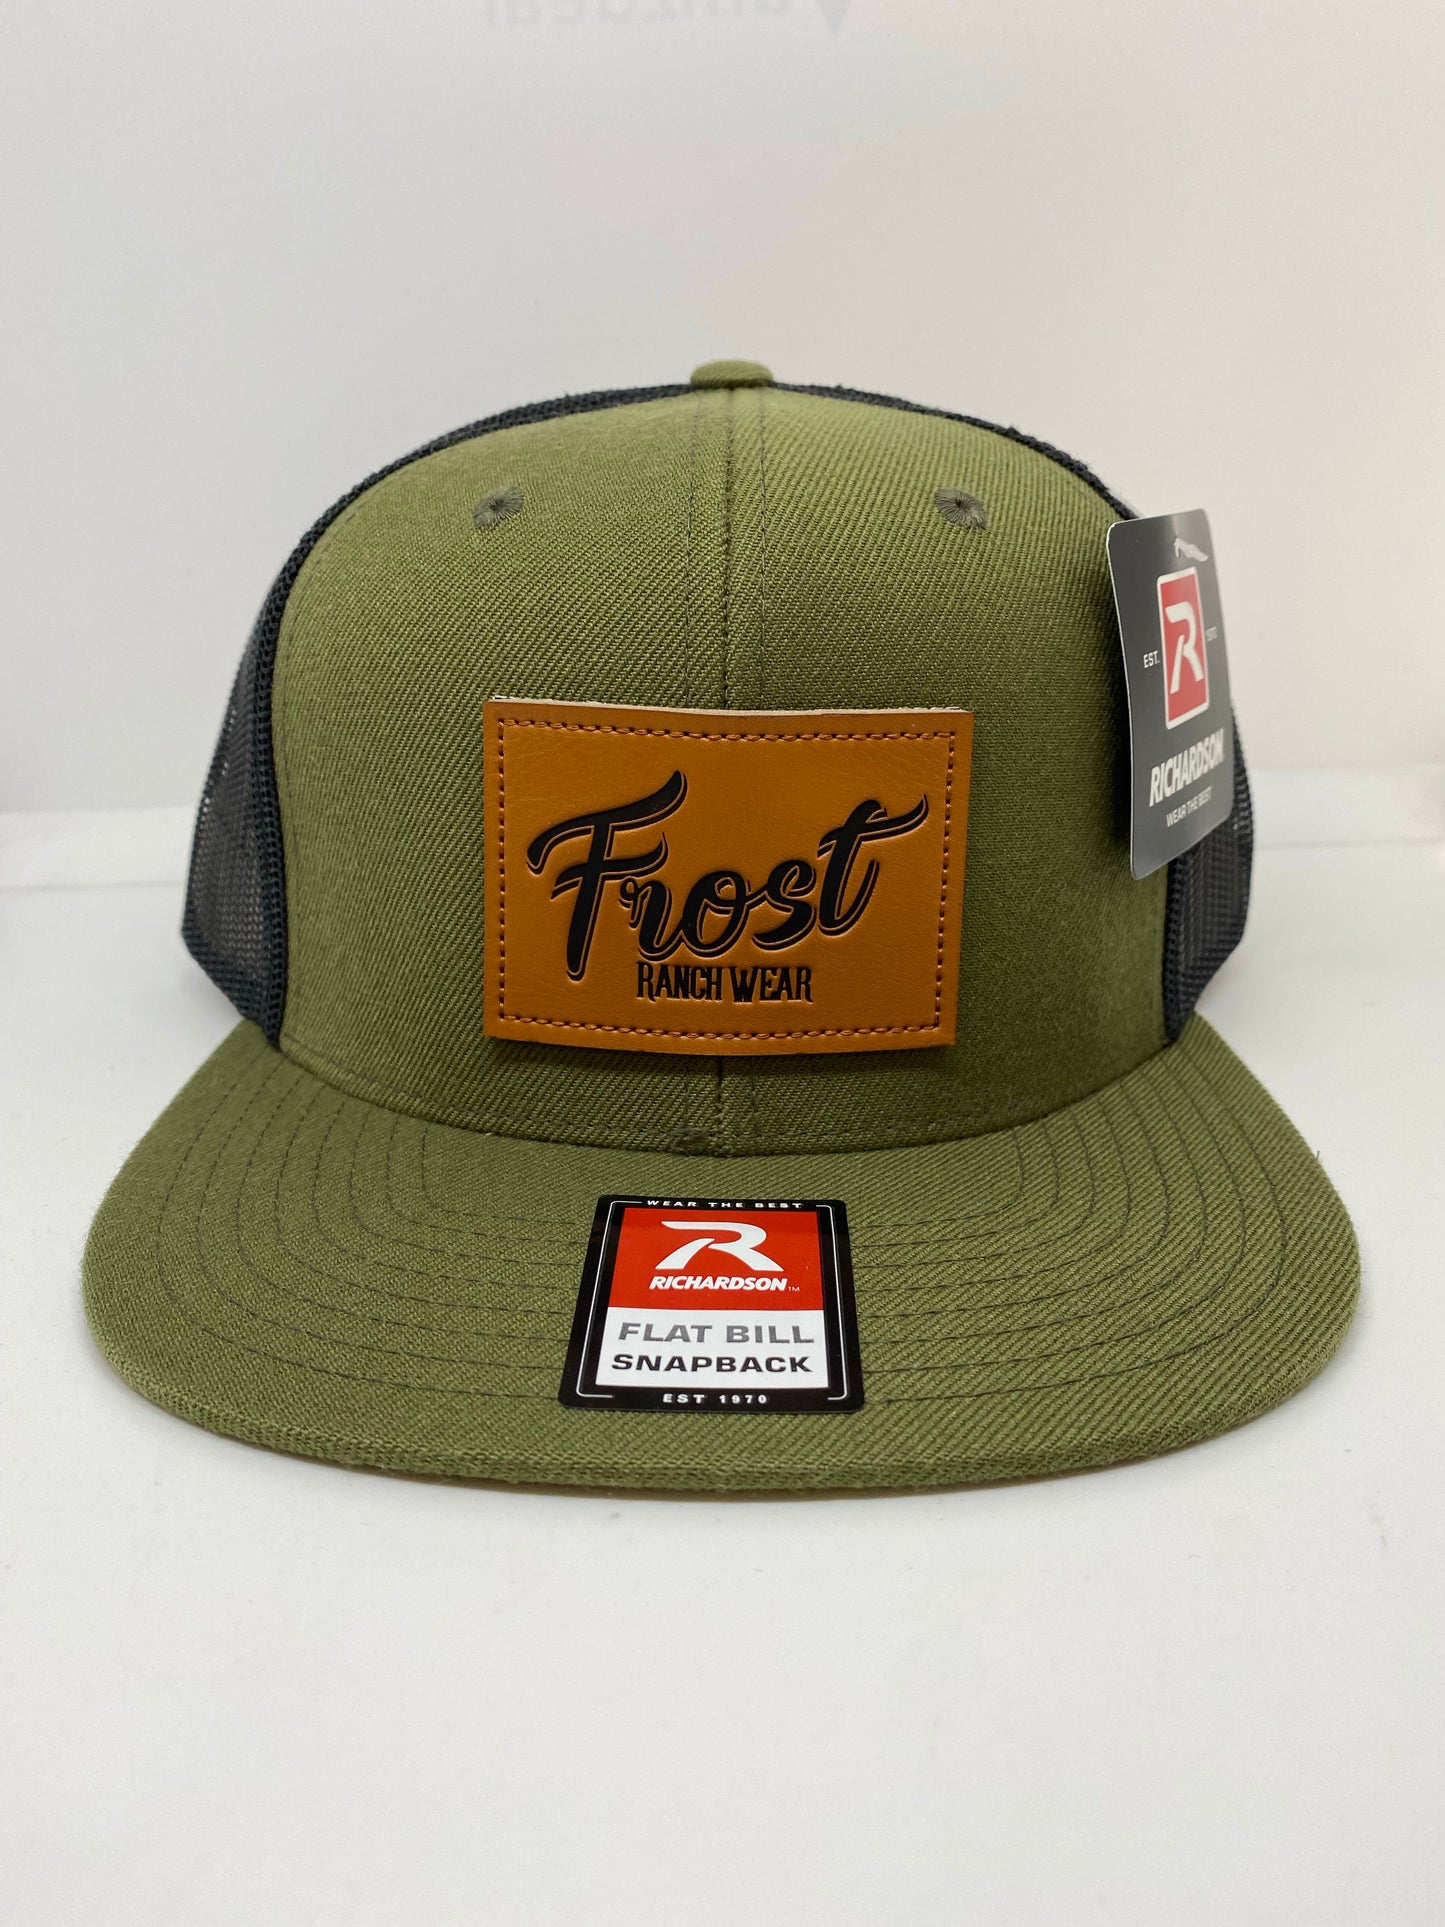 Frost Ranch Wear Leather Patch Cap